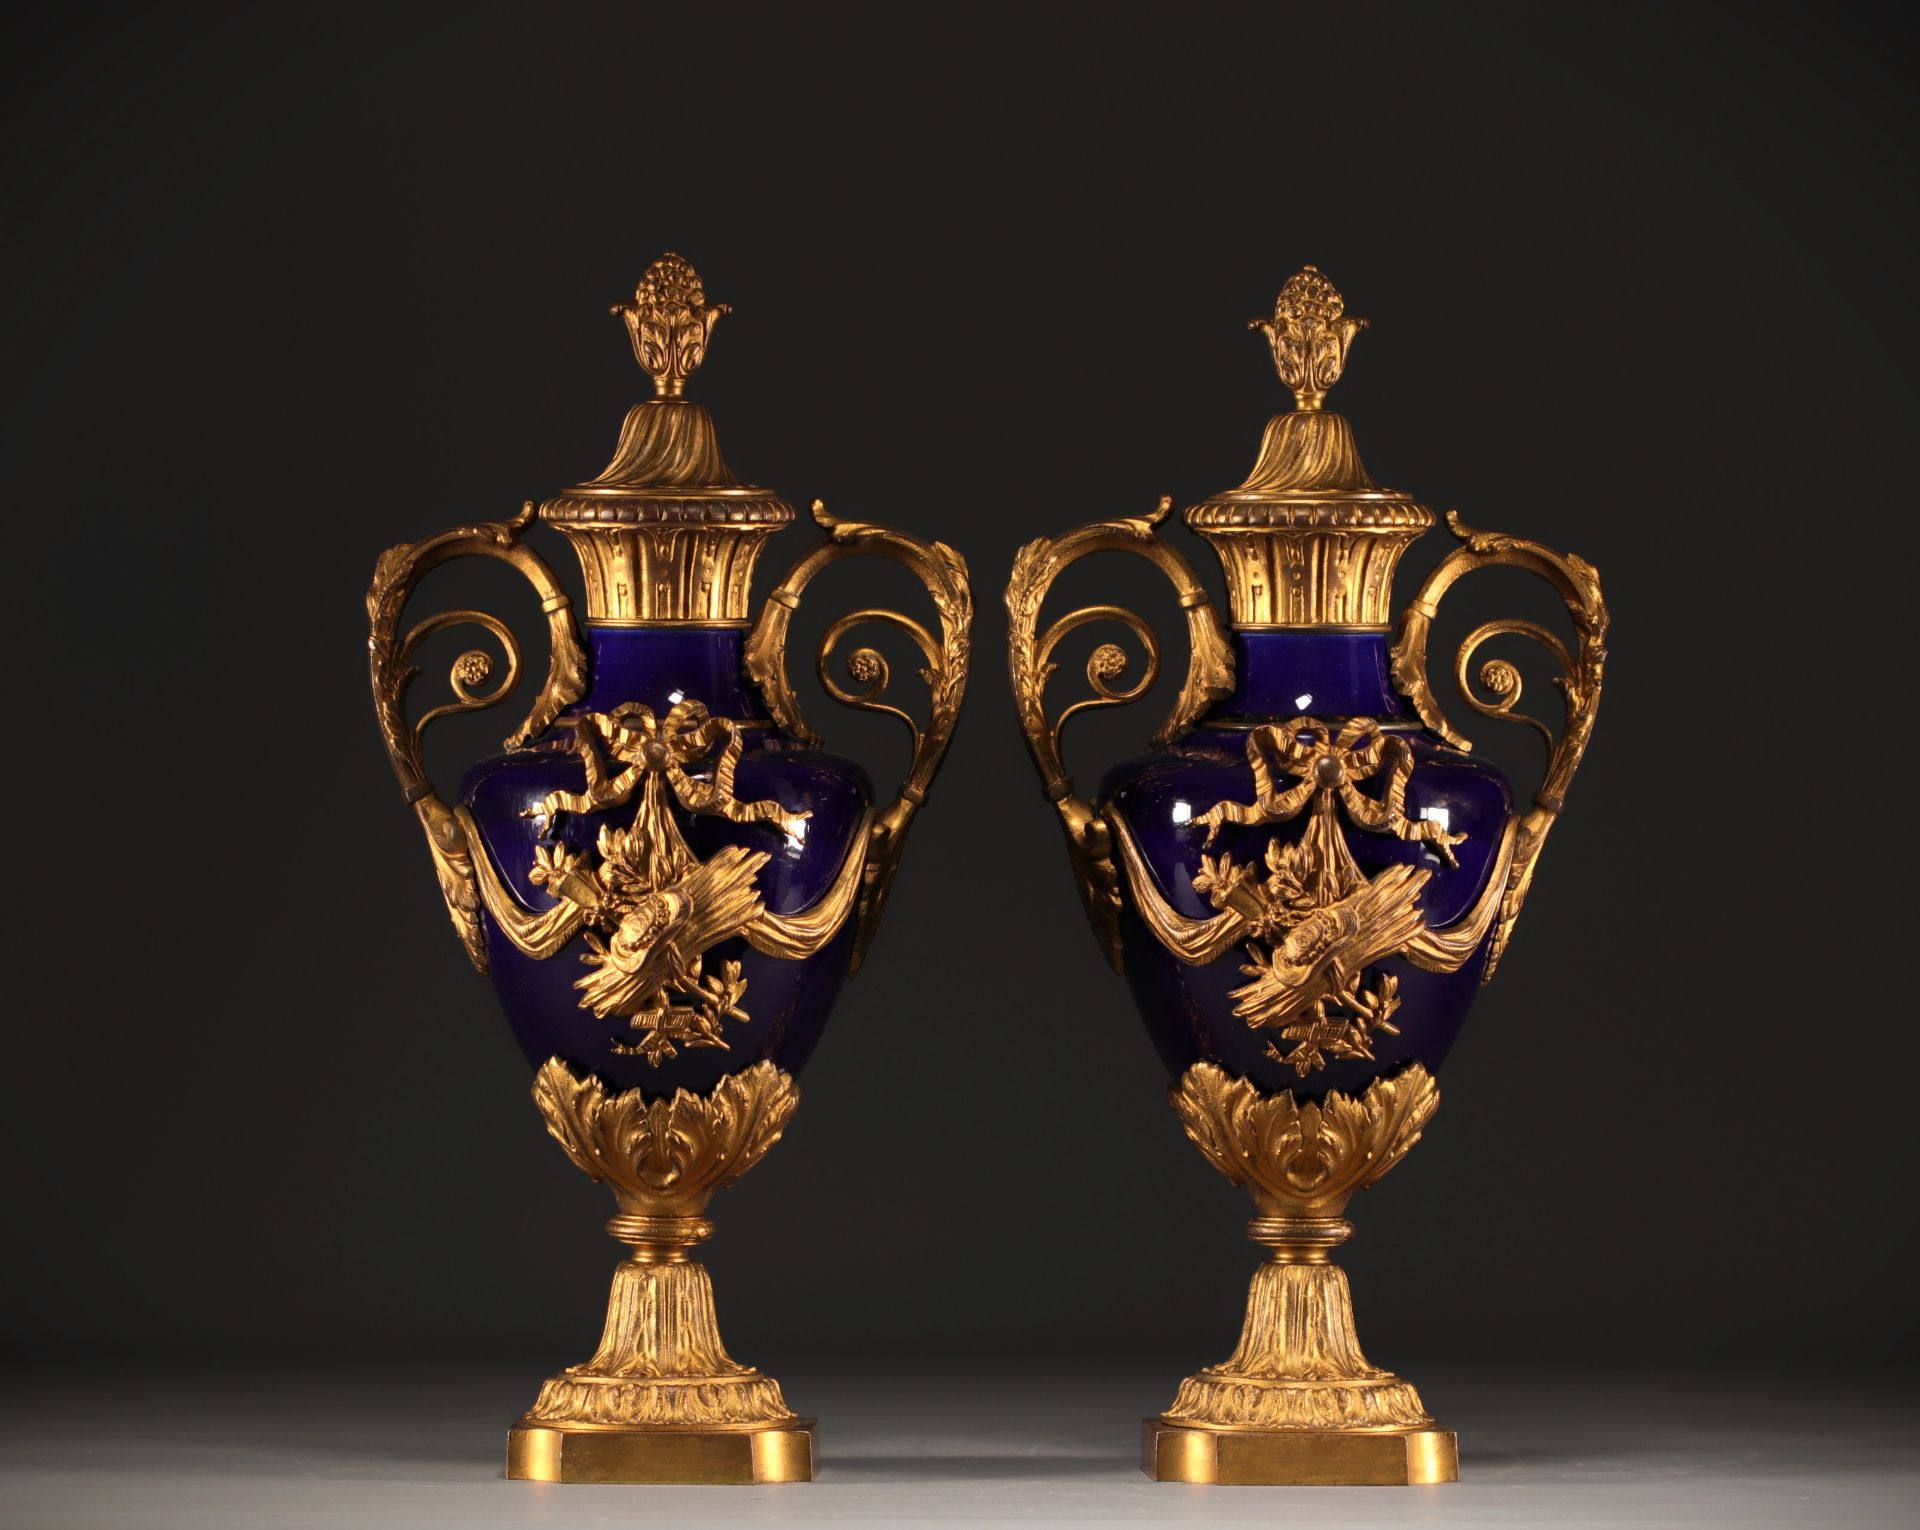 Pair of Louis XVI style covered vases in "bleu de Sevres" porcelain, gilded and chased bronzes.